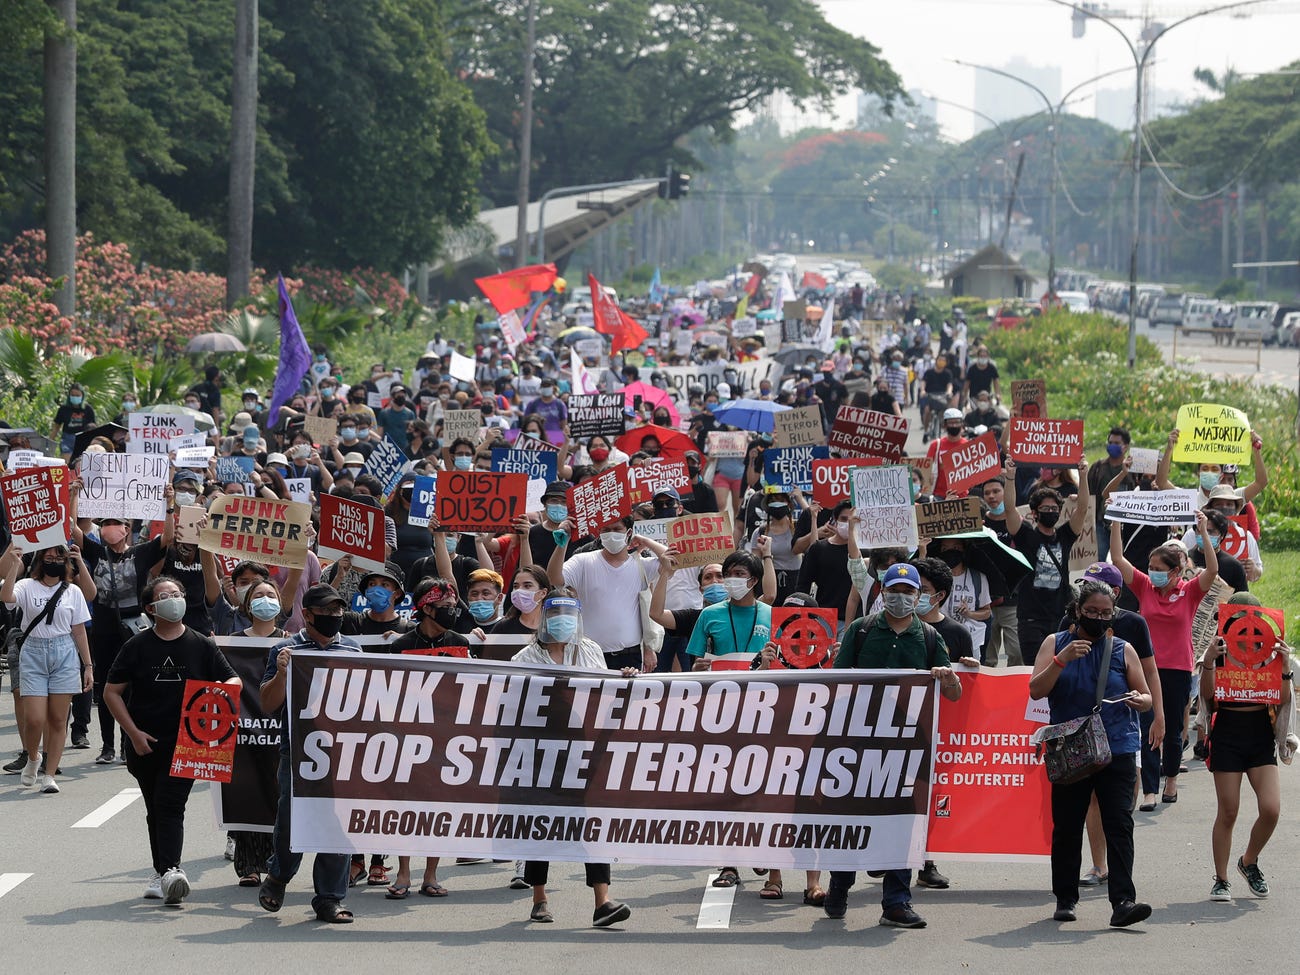 Protesters hold slogans during a rally calling on legislators to junk the proposed anti-terror bill in Manila, Philippines, on Thursday June 4, 2020. Aaron Favila / ASSOCIATED PRESS